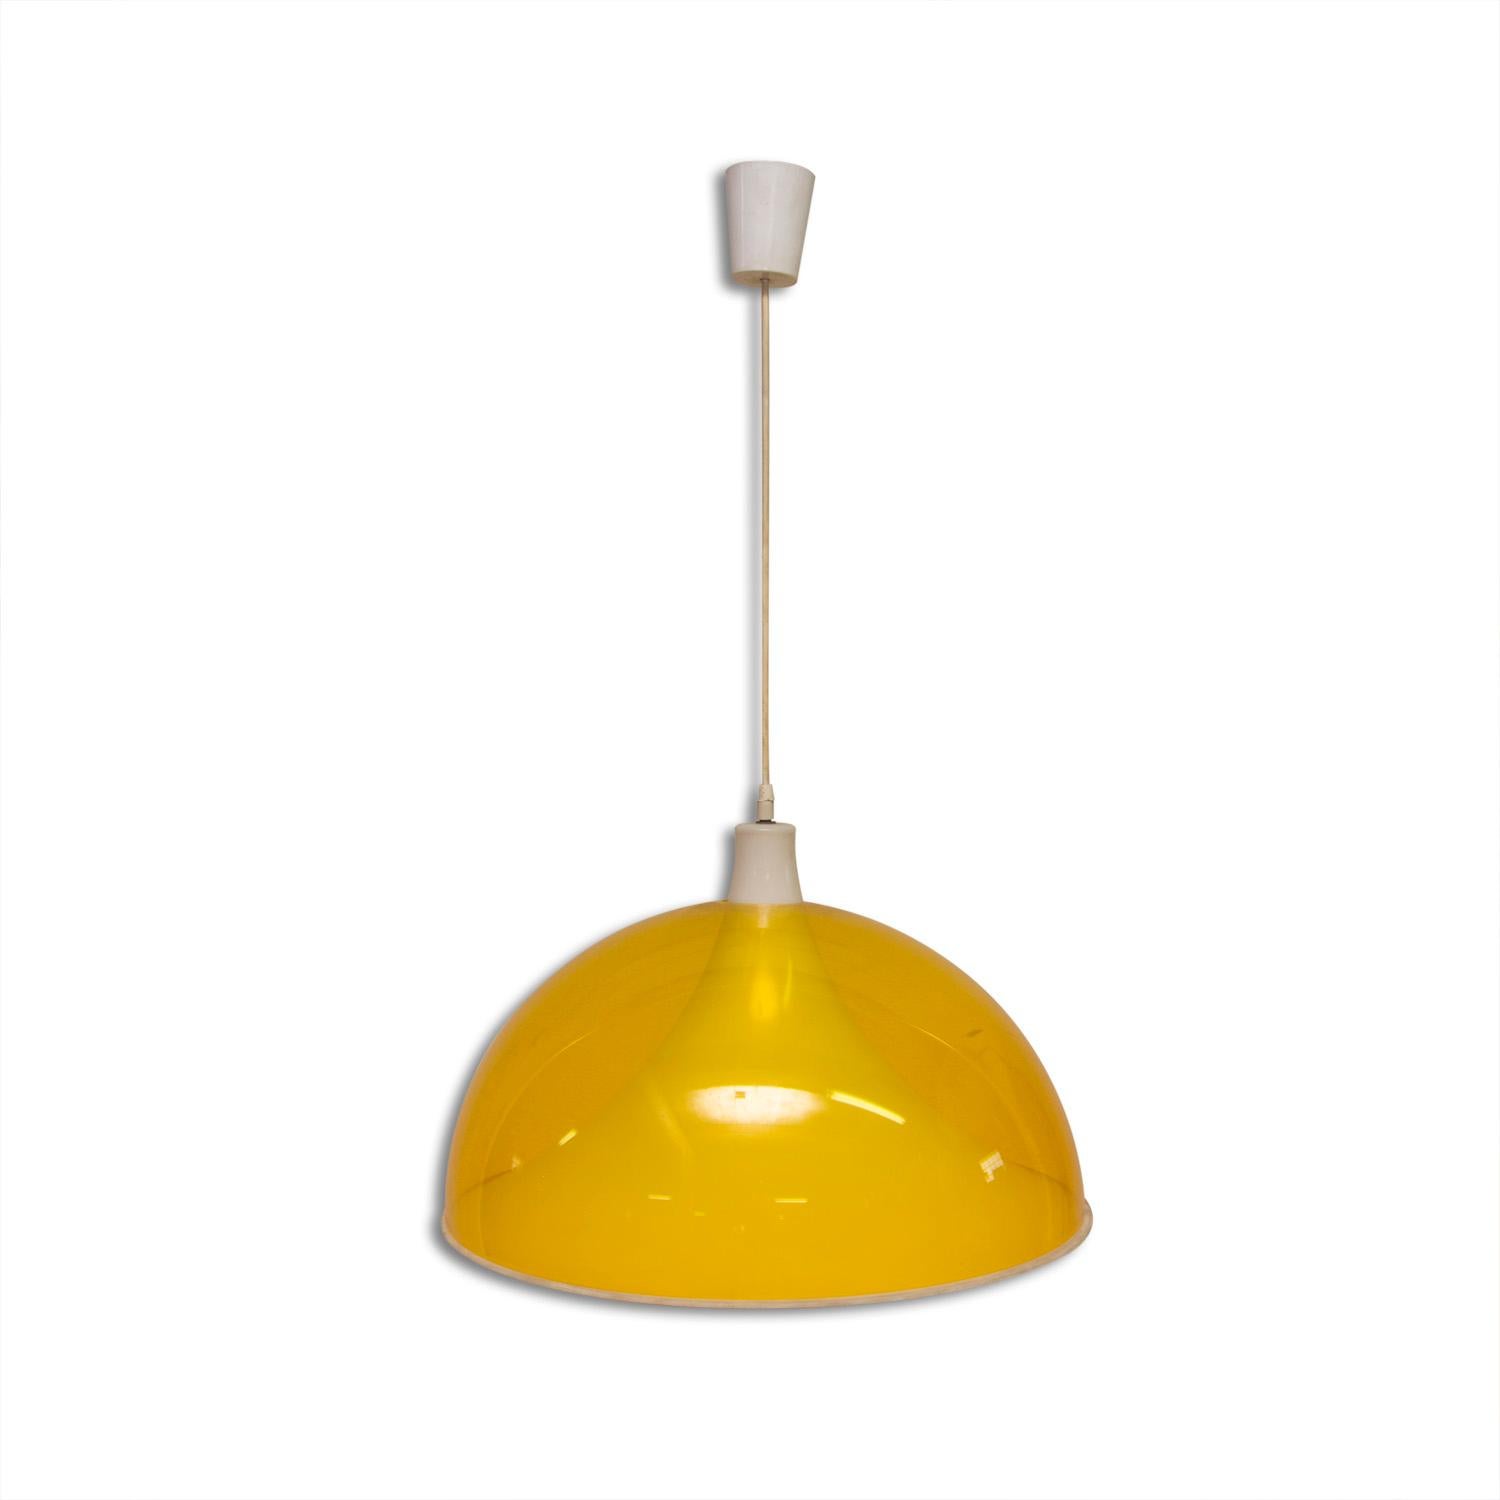 An original oval plastic pendant in yellow. Origin not identified. Made probably in the 1960s. Very interesting design reminiscent of Scandinavian or Italian production. This is a very interesting design piece suitable for any interior. The